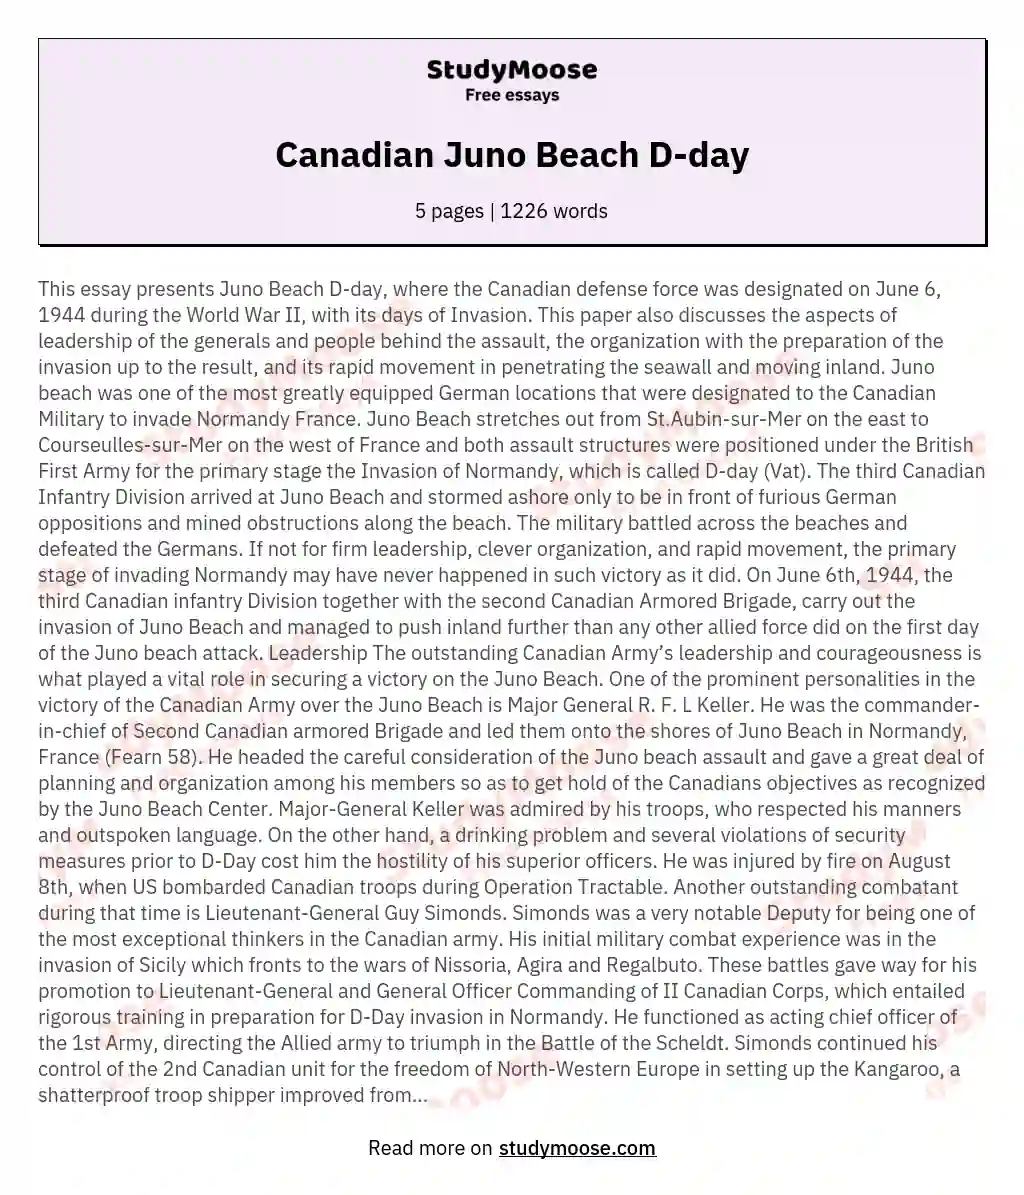 Canadian Juno Beach D-day